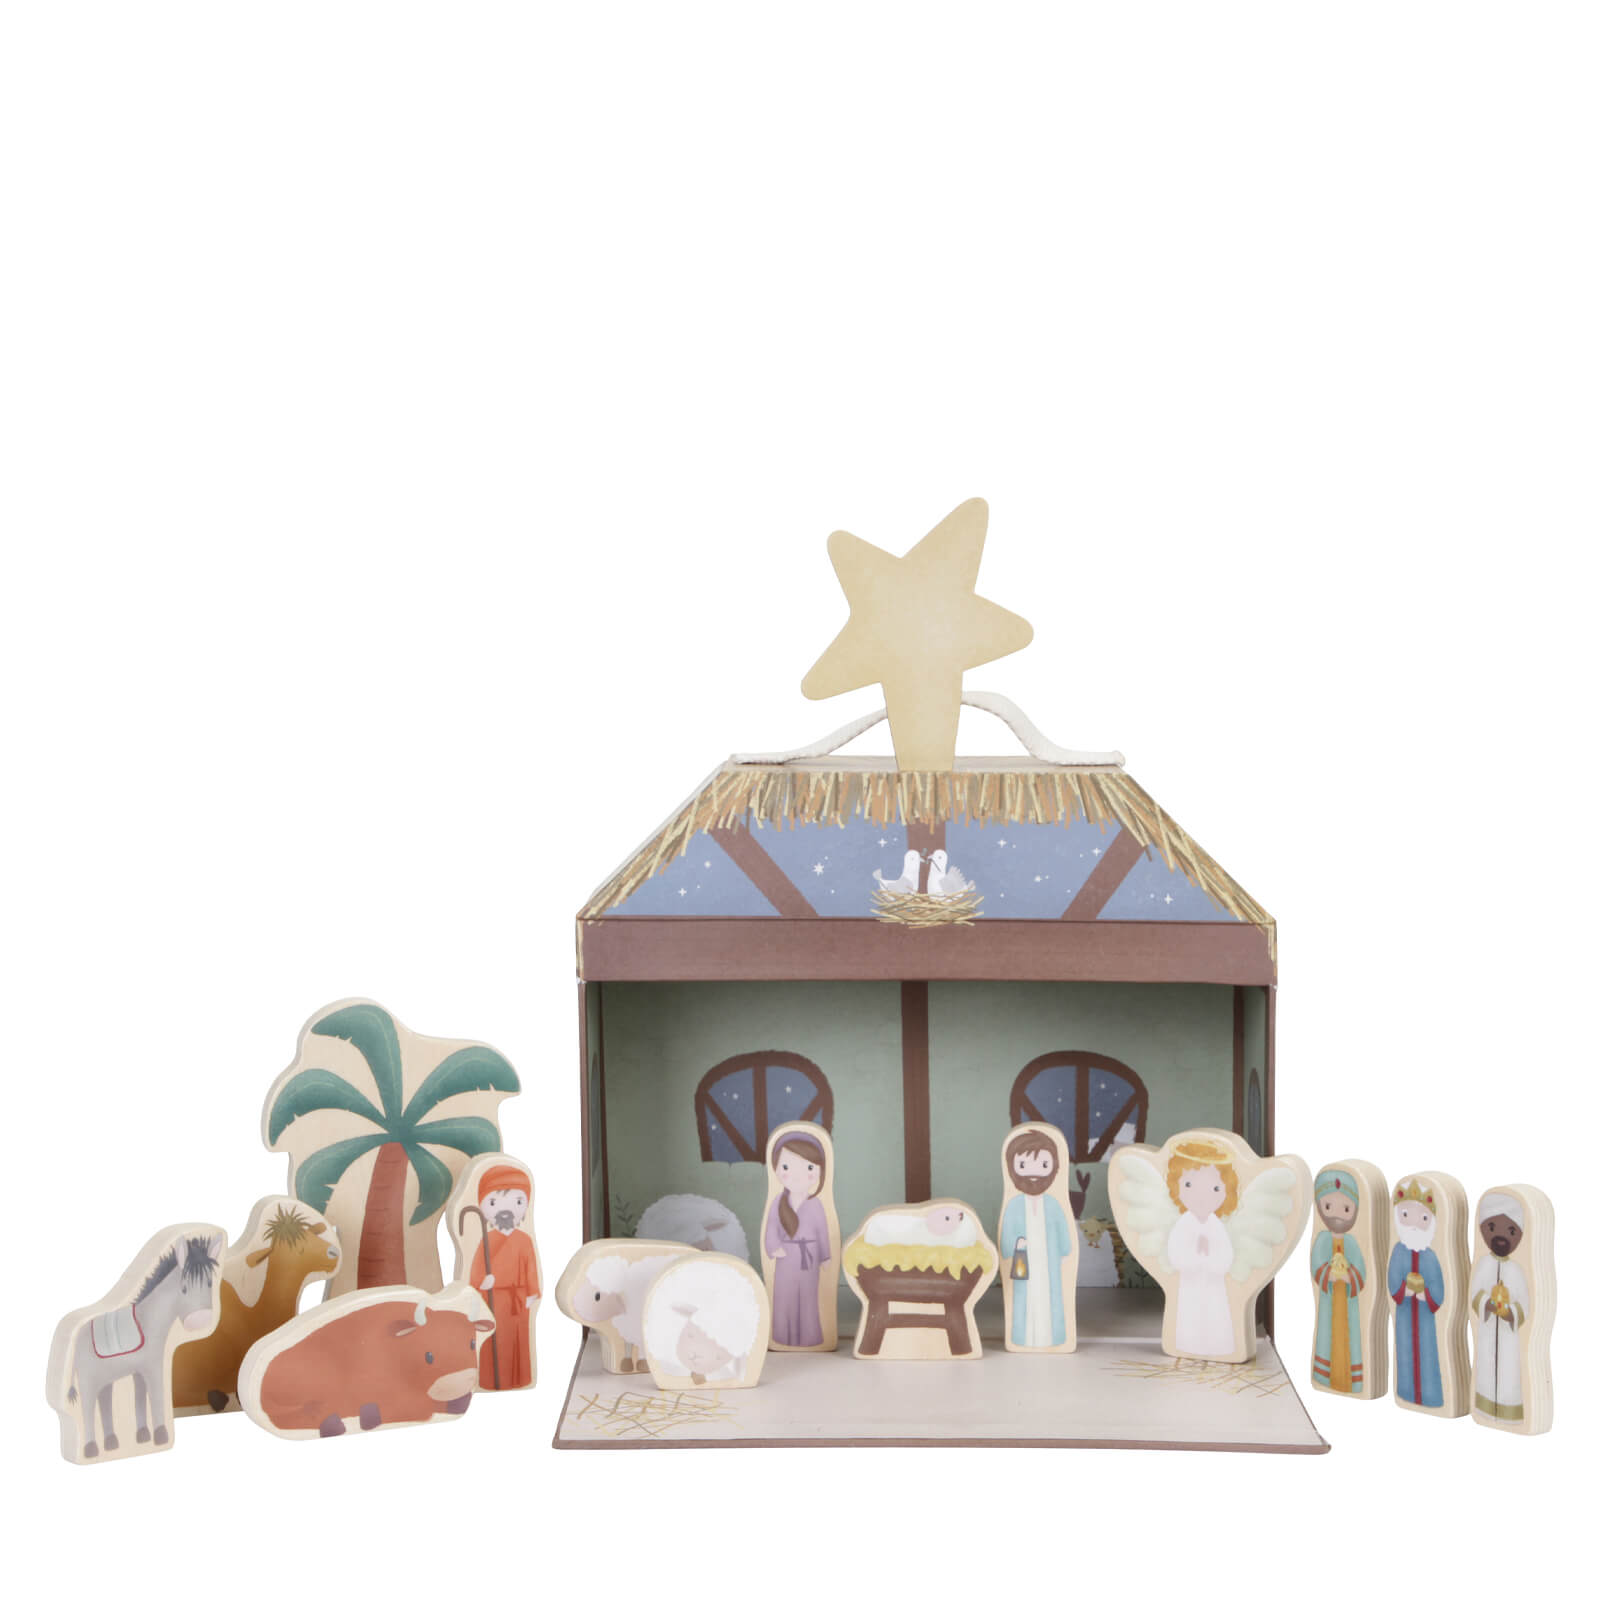 Little Dutch Nativity Scene With Wooden Figures – Small Kins